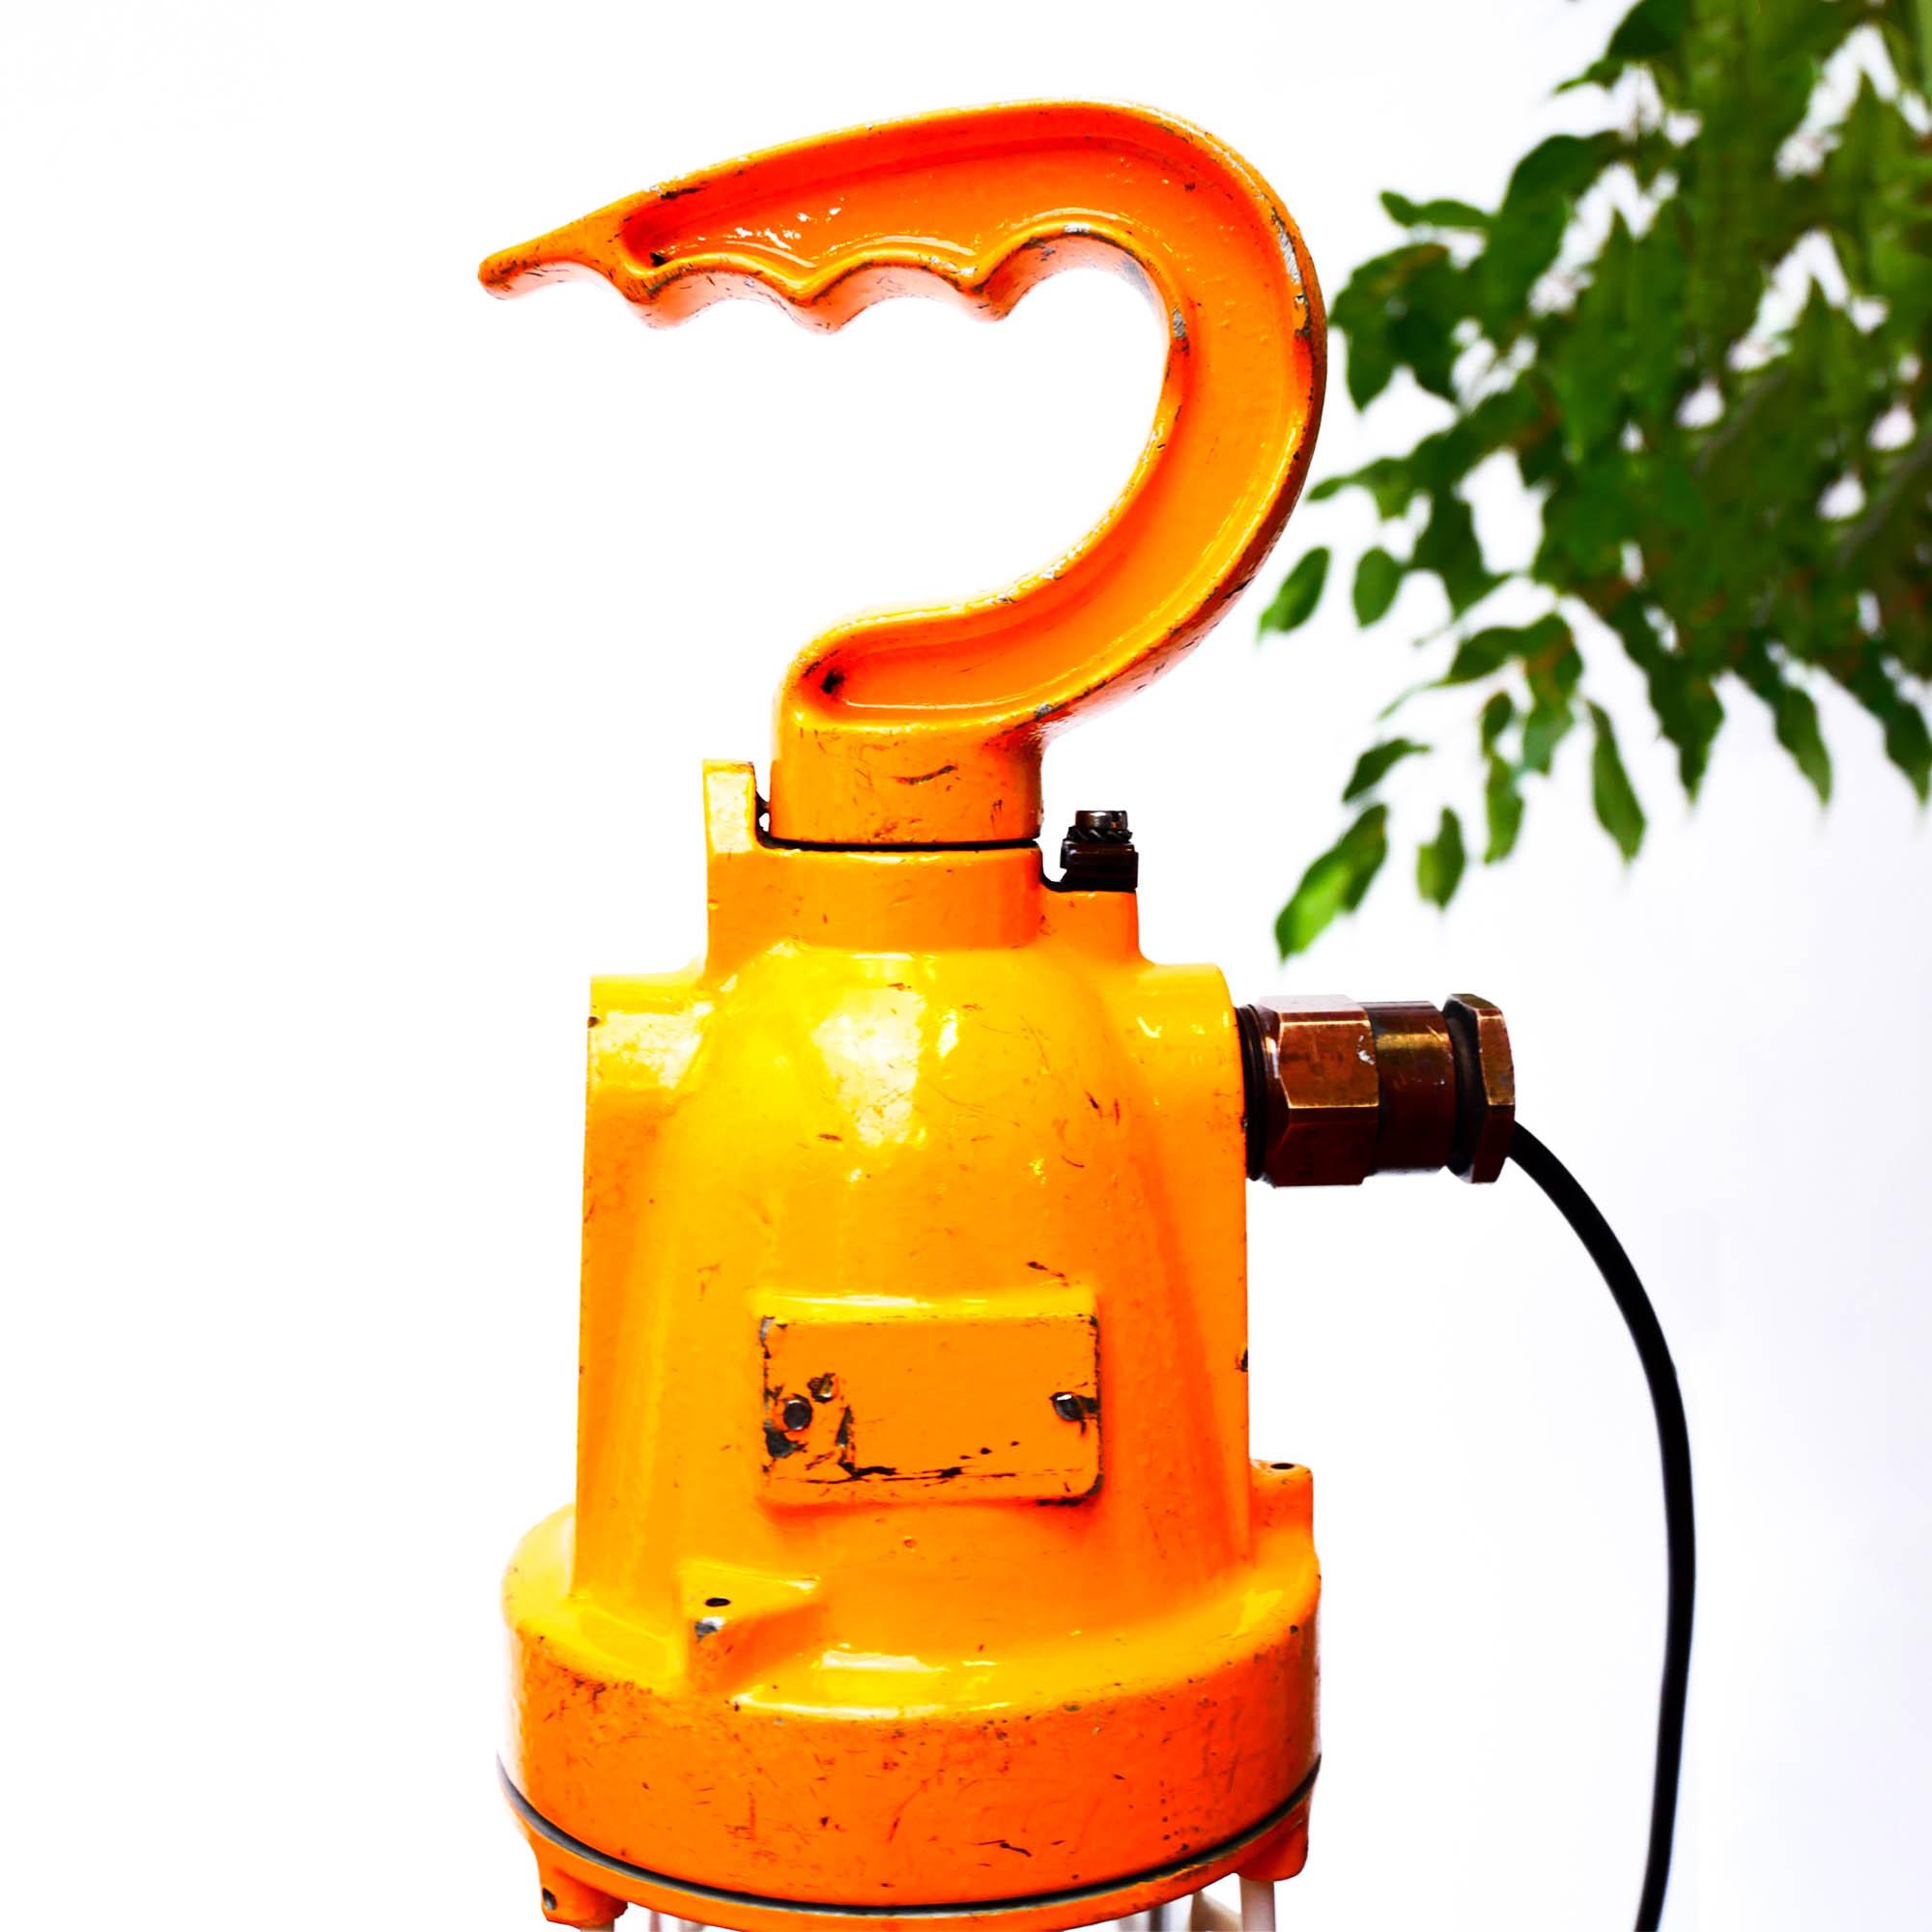 Painted Yellow Inspection Lamp V1, Italy, circa 1960-1969